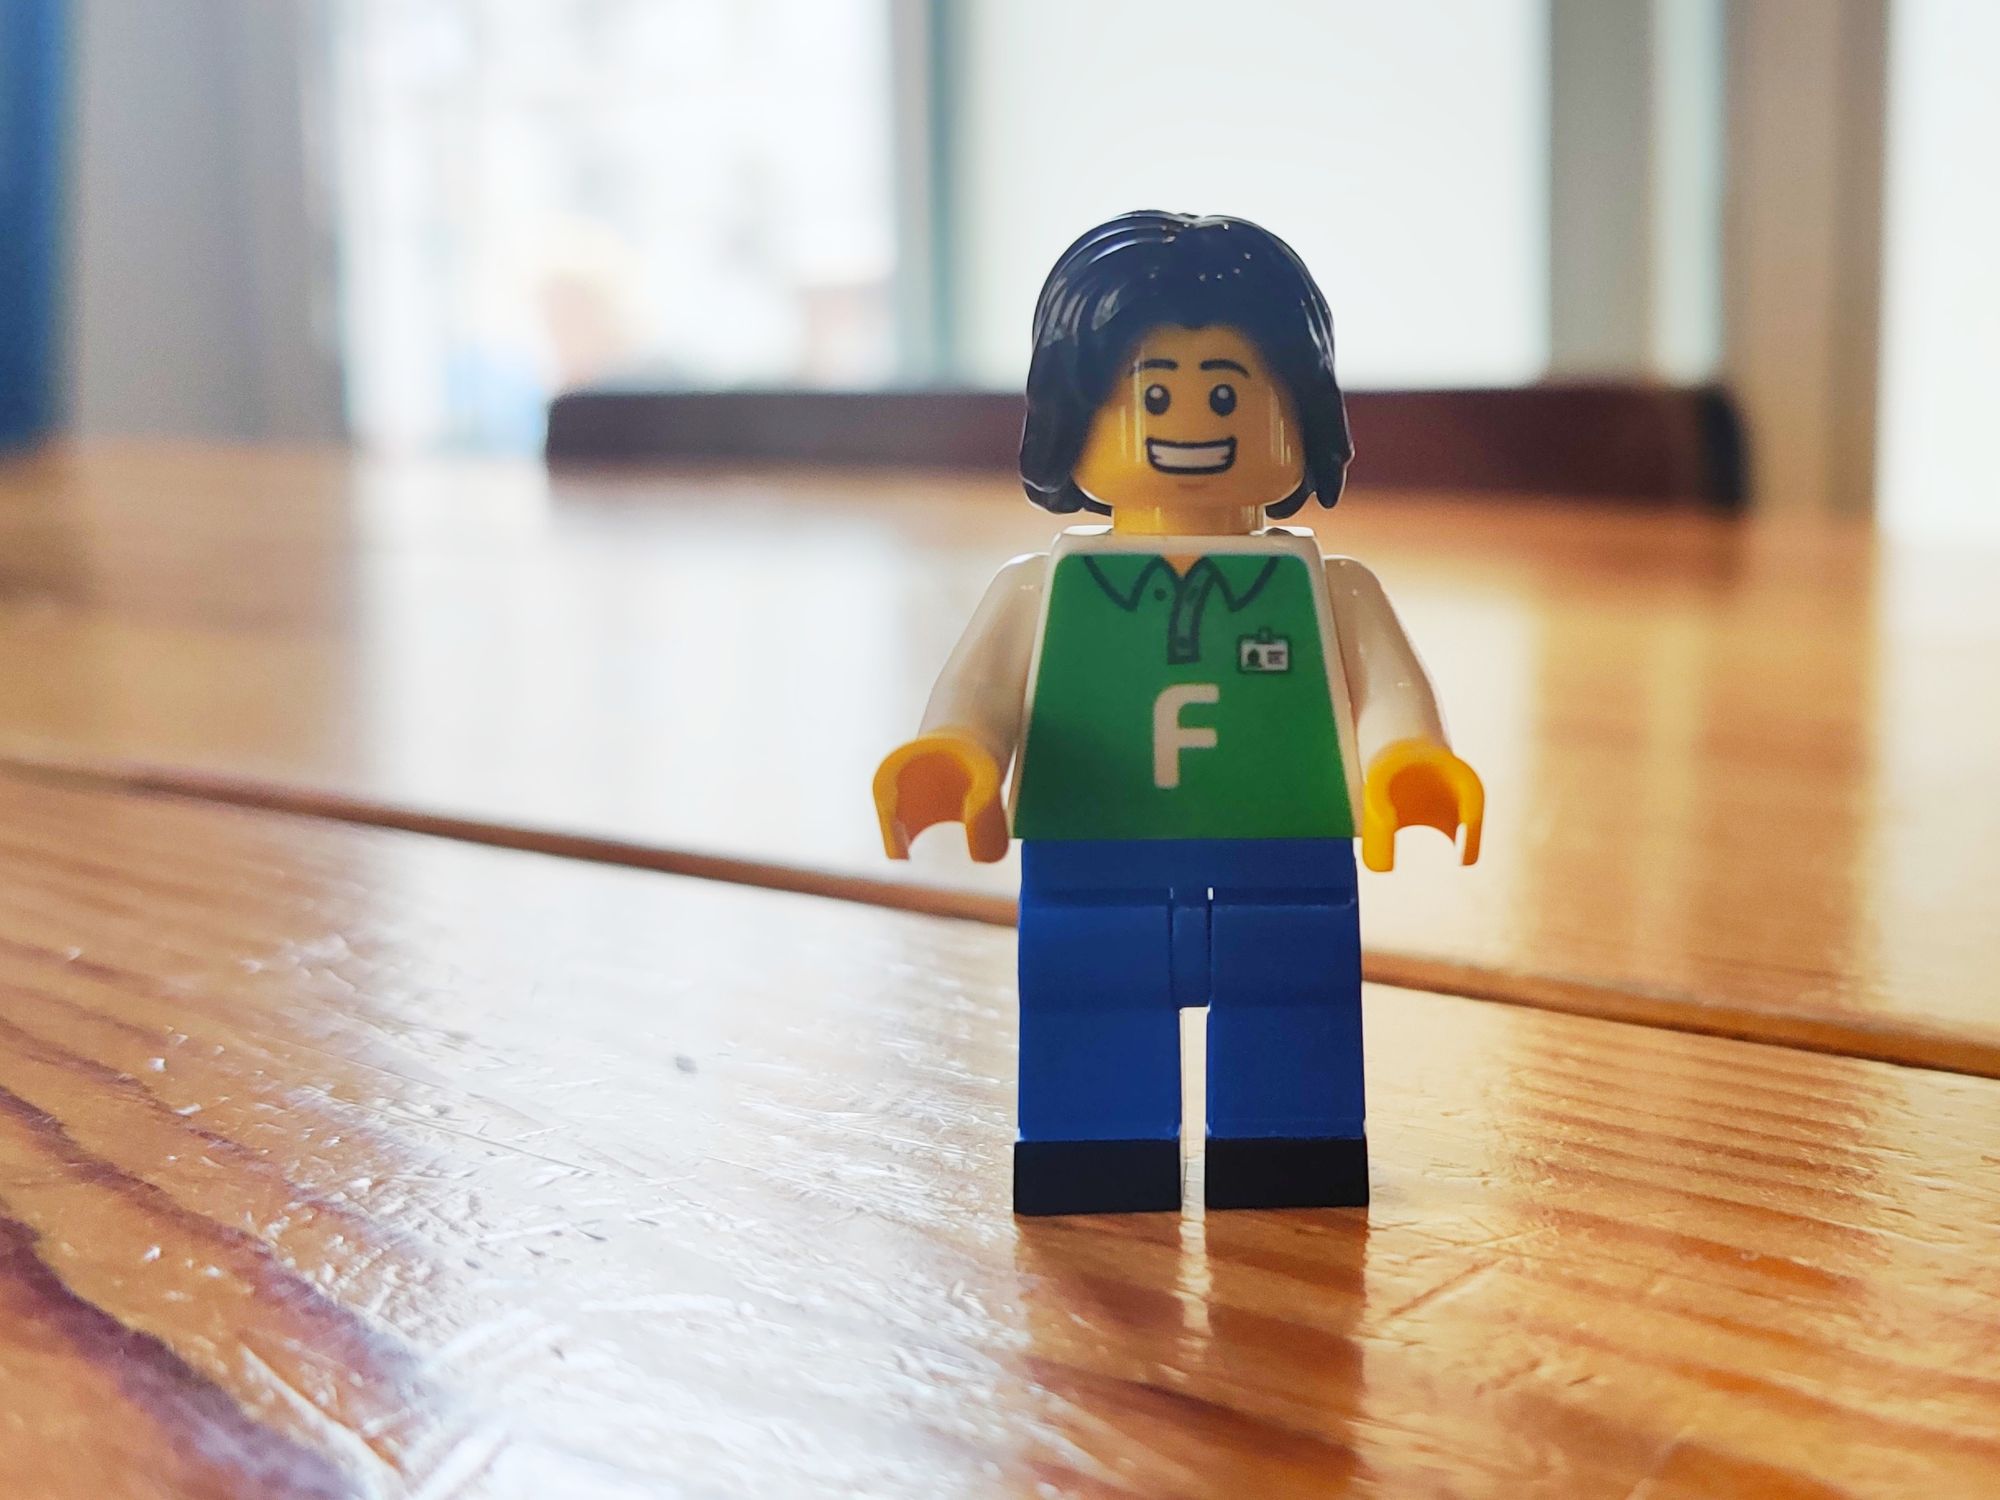 A custom LEGO figure that looks like me in Futurice hoodie and jeans – my regular outfit